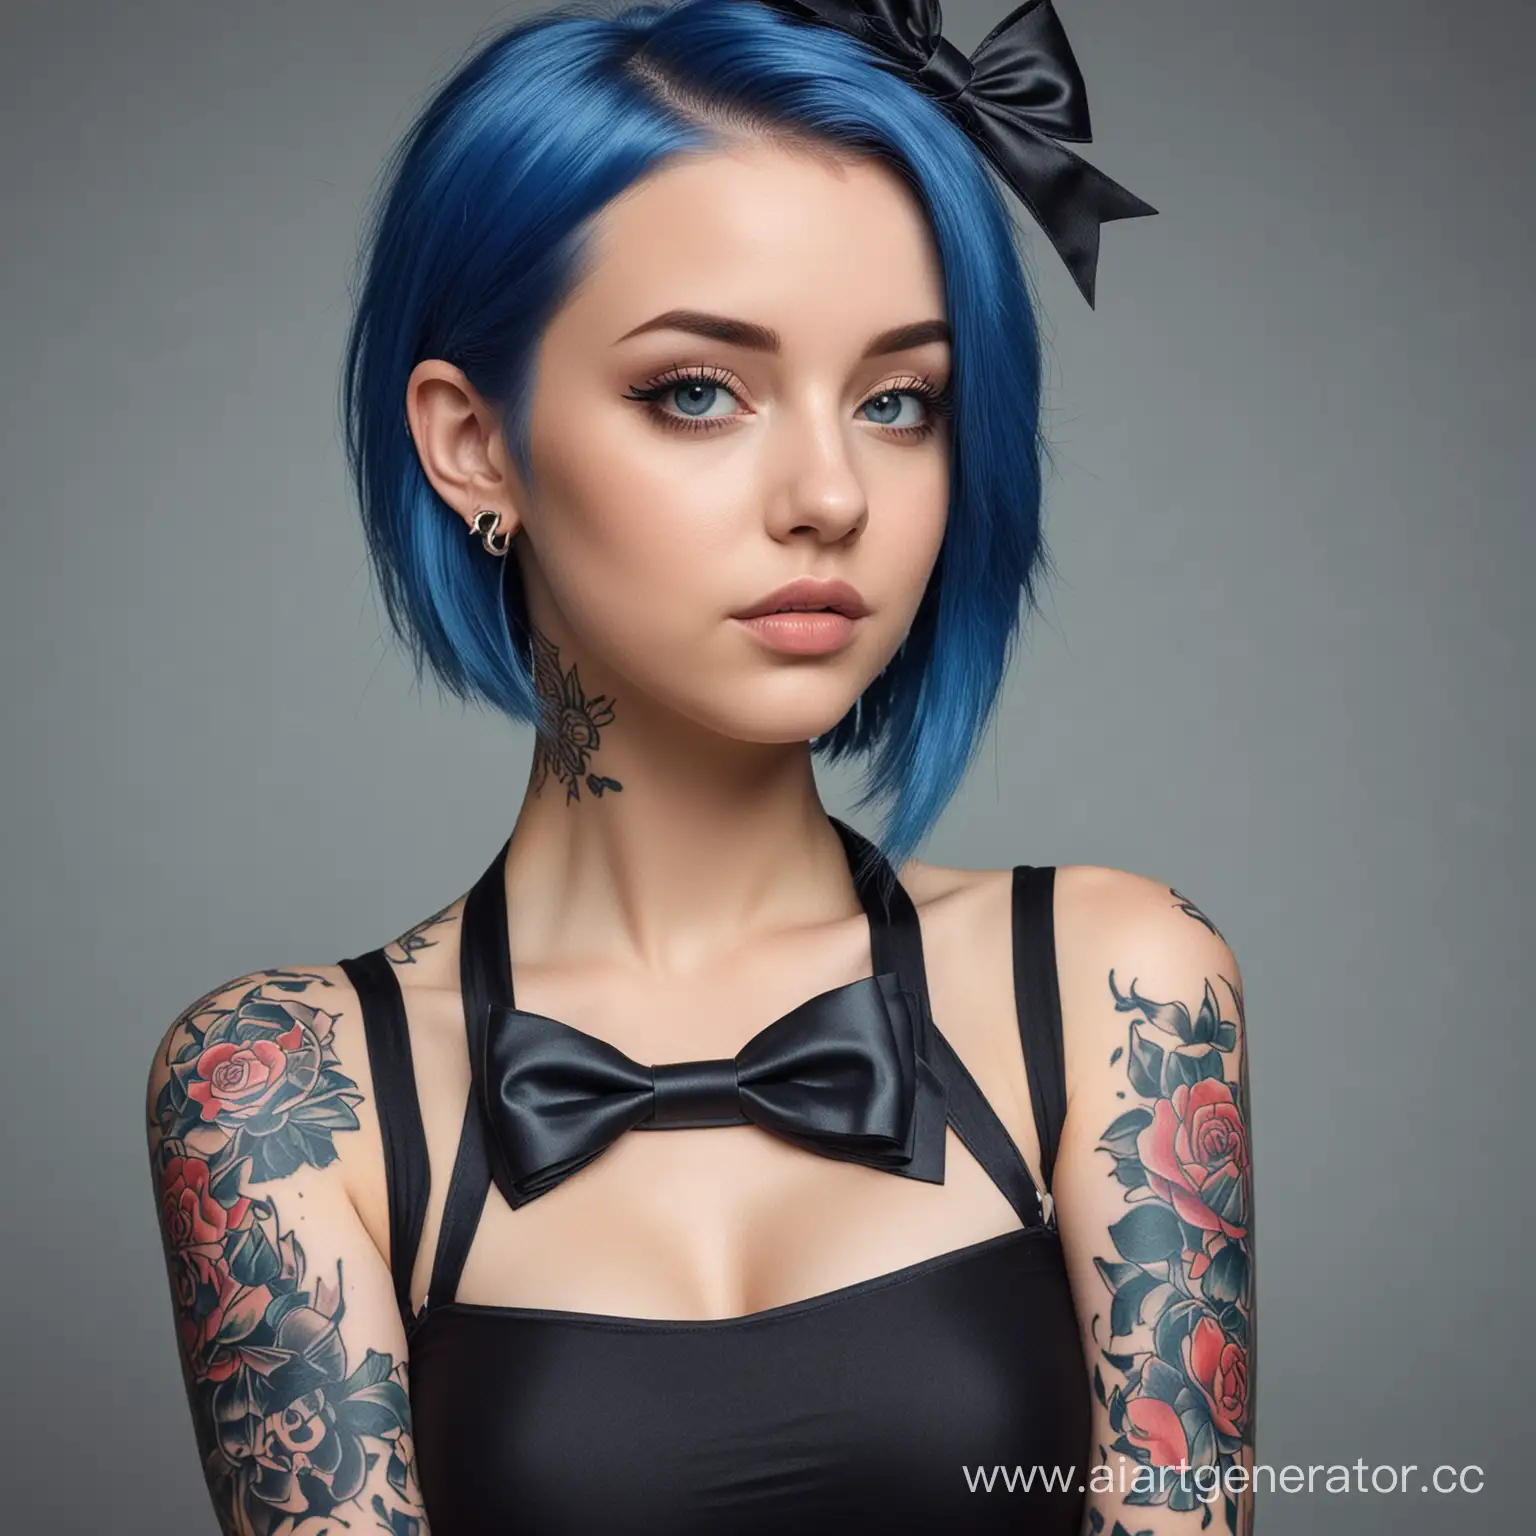 Tattooed-Girl-with-Blue-Hair-and-Blocky-Bow-in-Chic-Attire